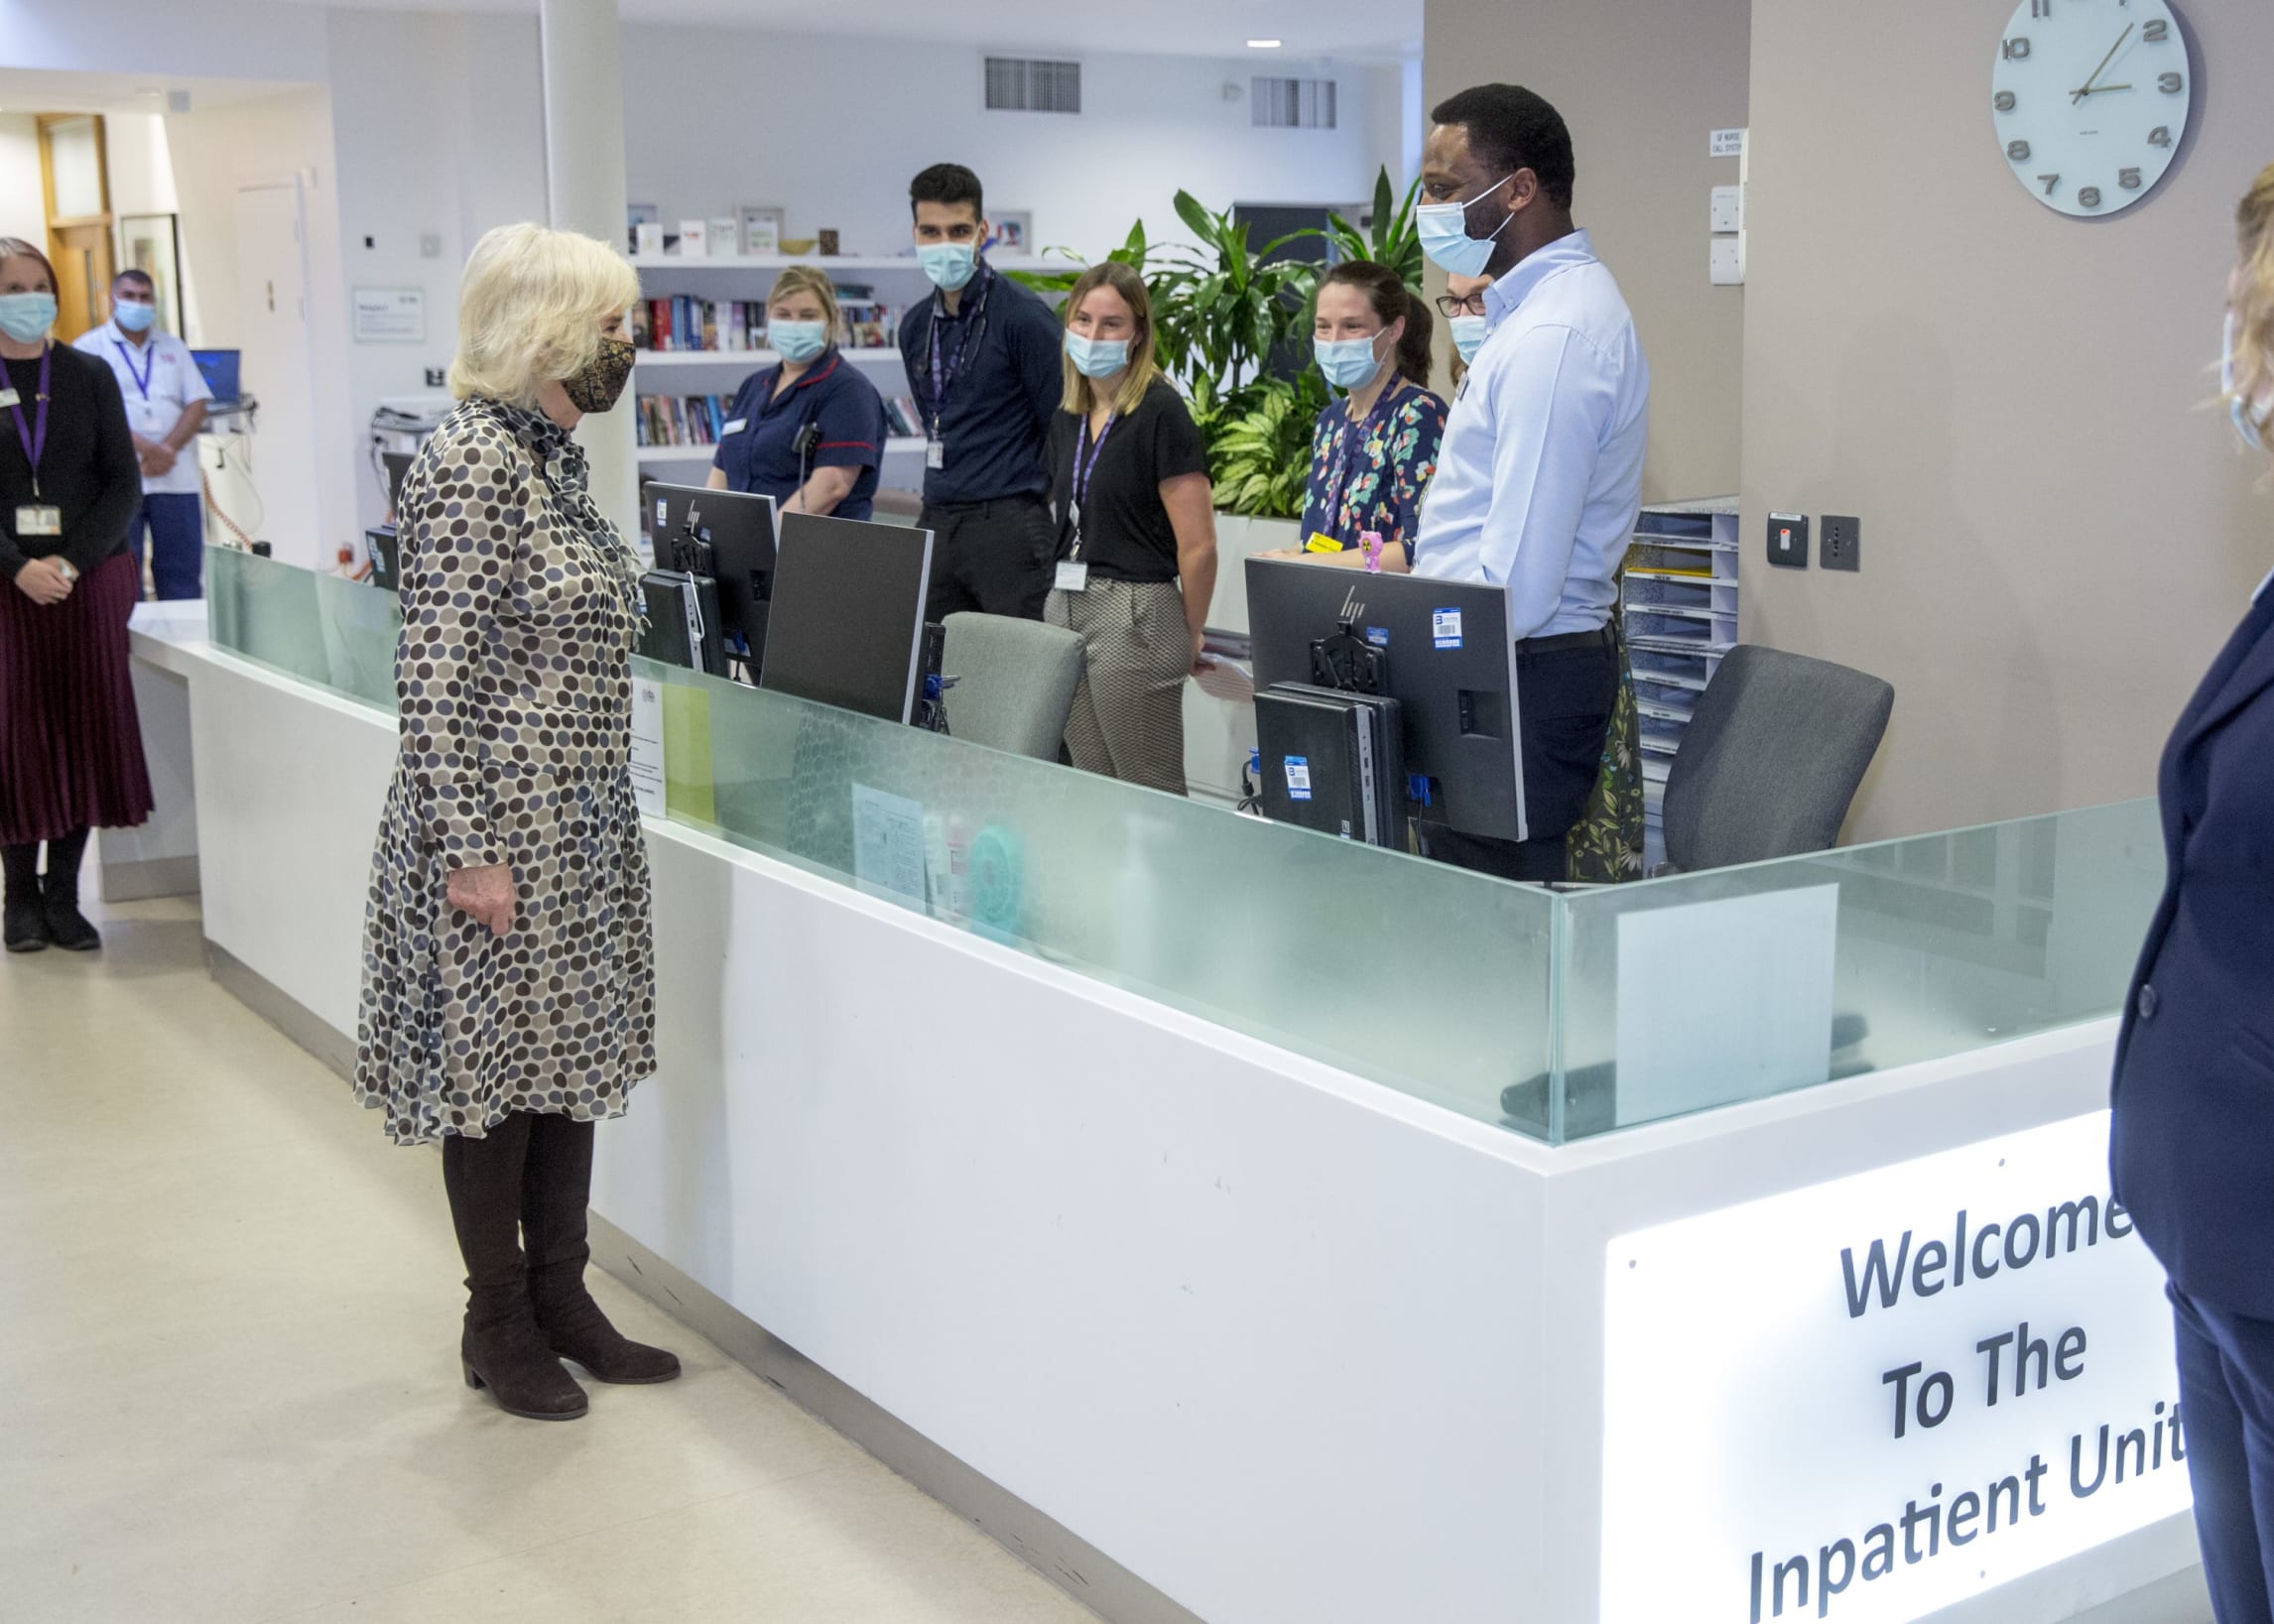 Her Majesty The Queen Consort speaking to staff on the Trinity Inpatient Unit reception desk